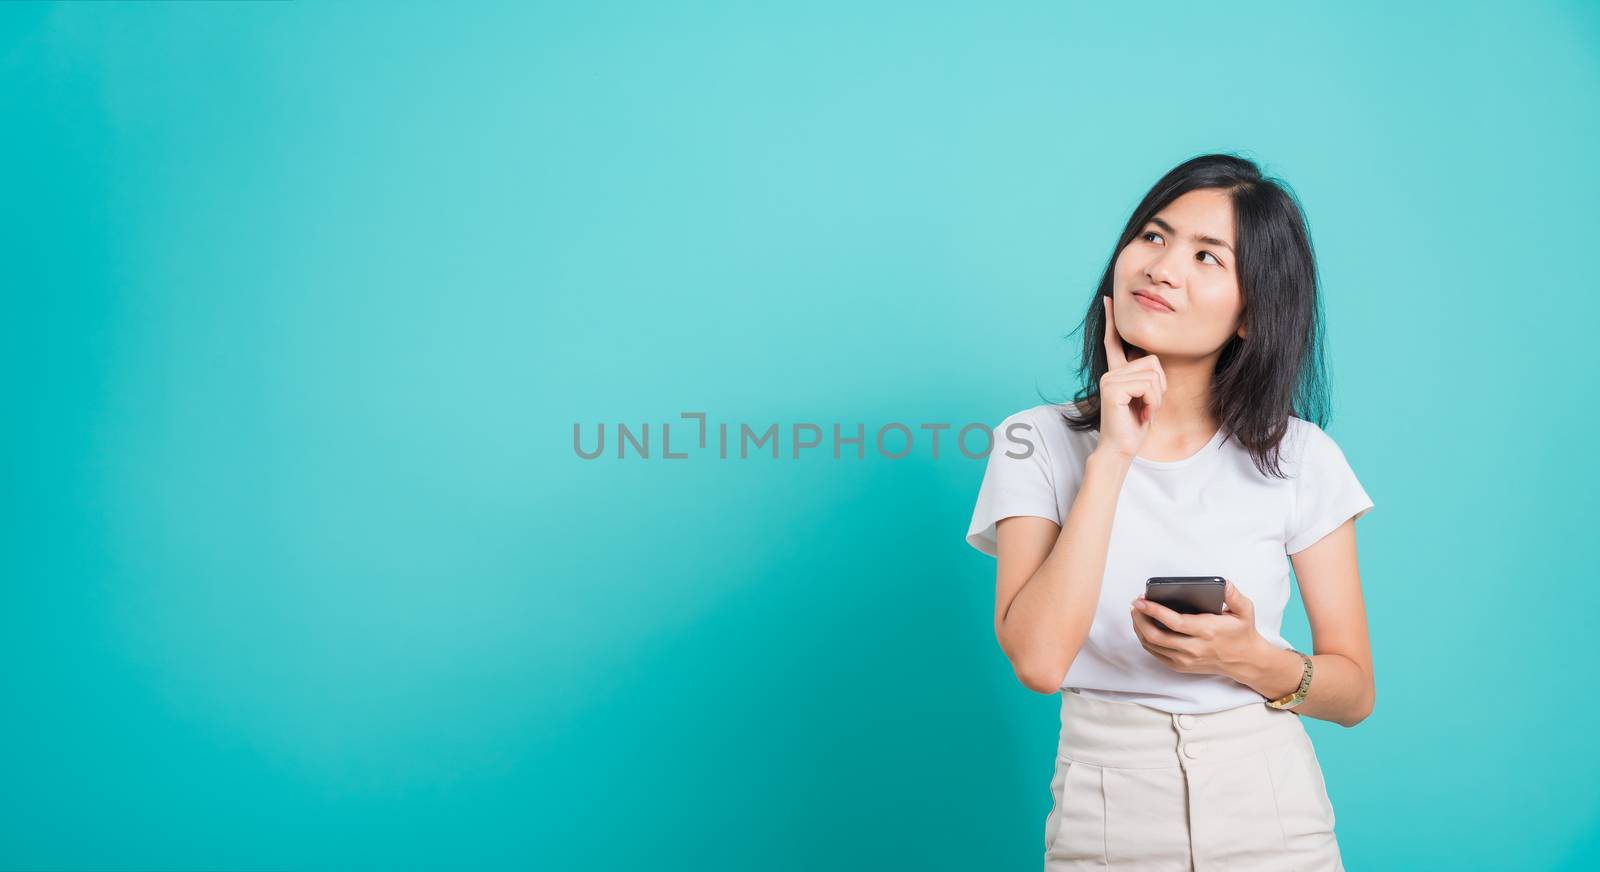 Woman standing smile, posing using mobile phone her thinking dre by Sorapop